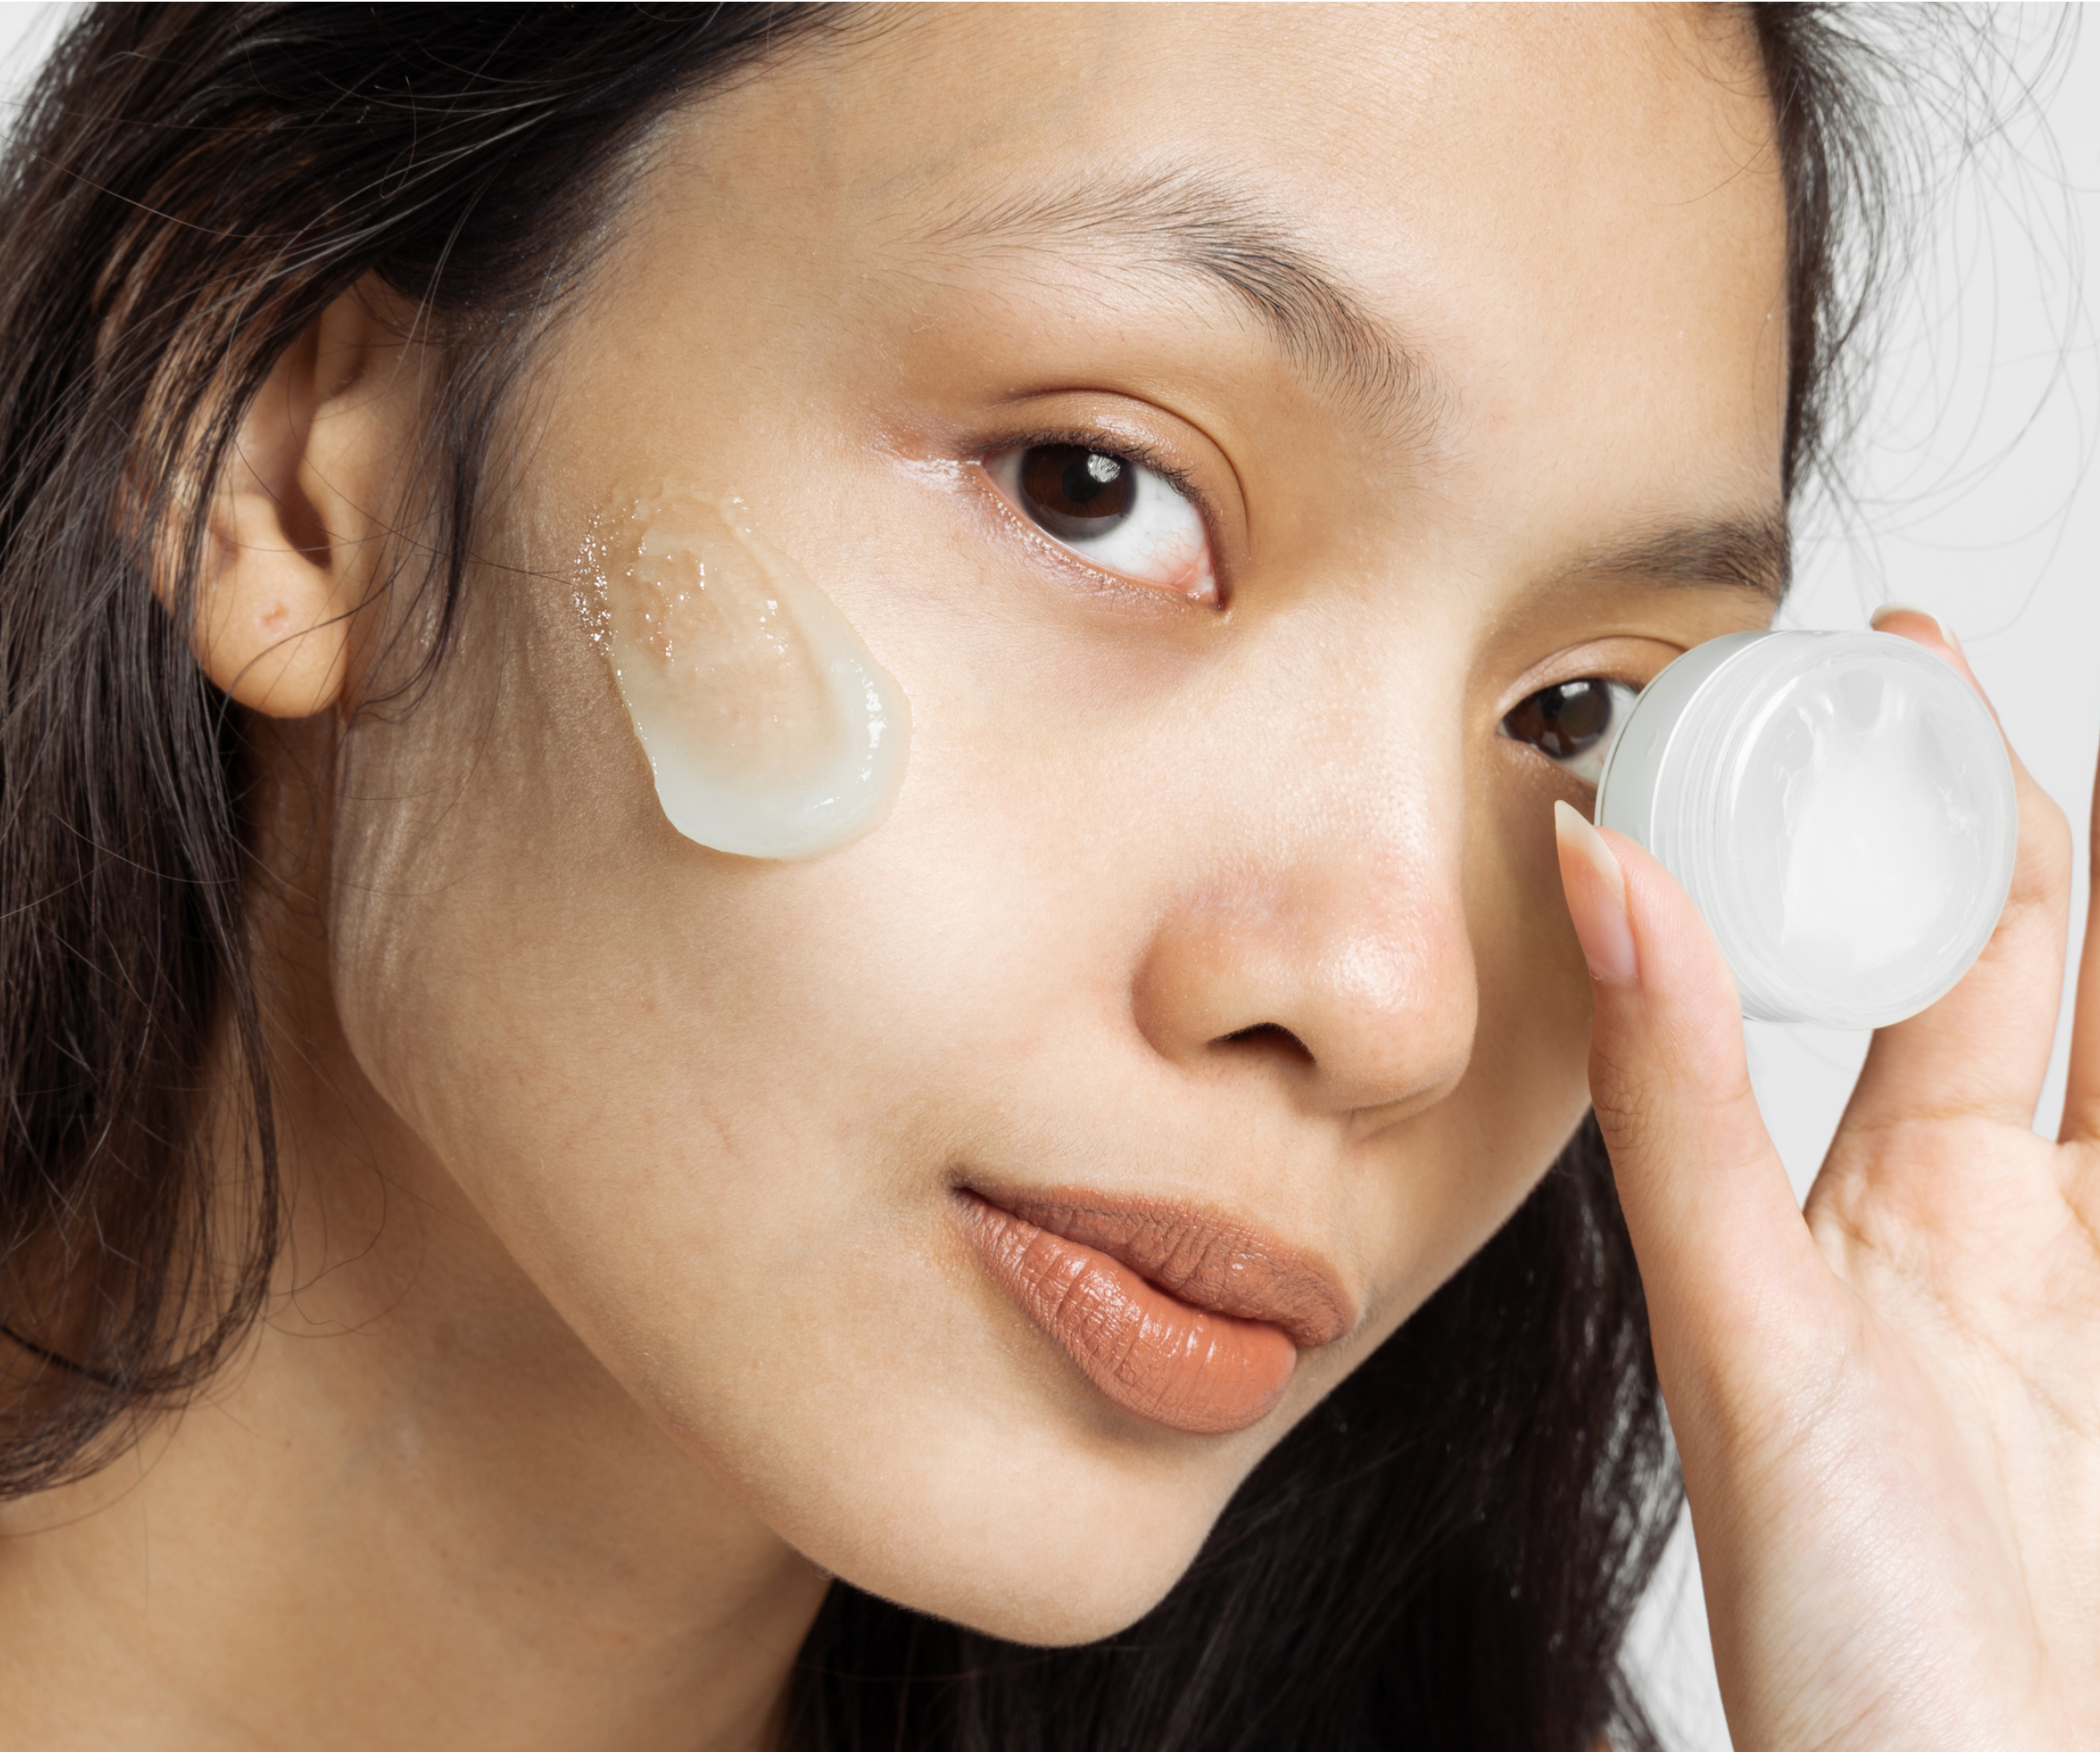 Top Rated Moisturizers For Seriously Dehydrated Fall Skin